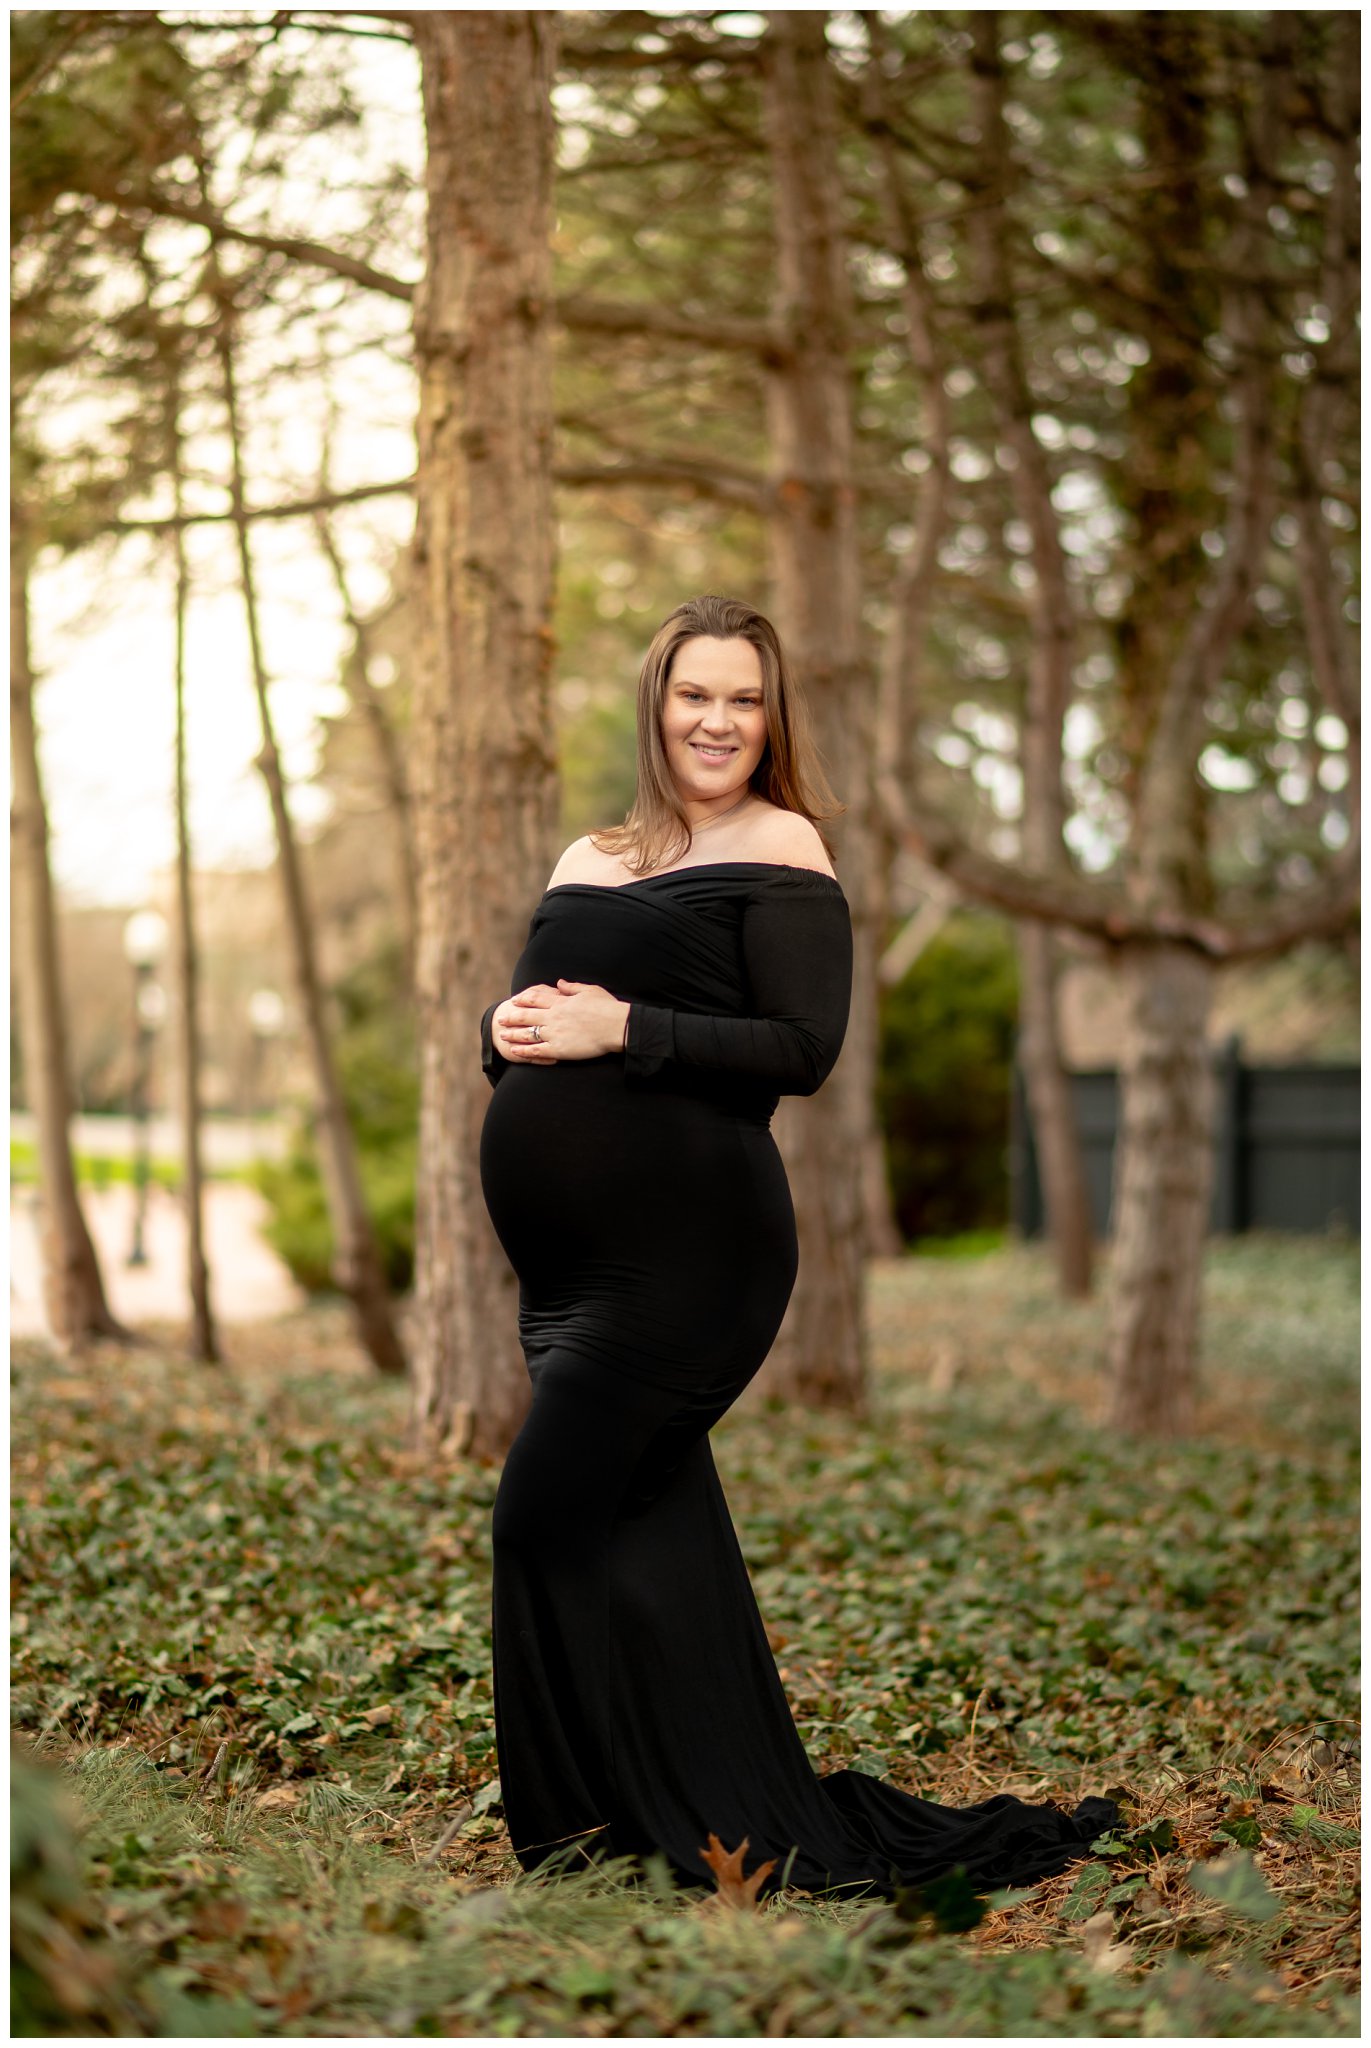 A maternity picture among ivy in Franklin Square in Syracuse, New York.